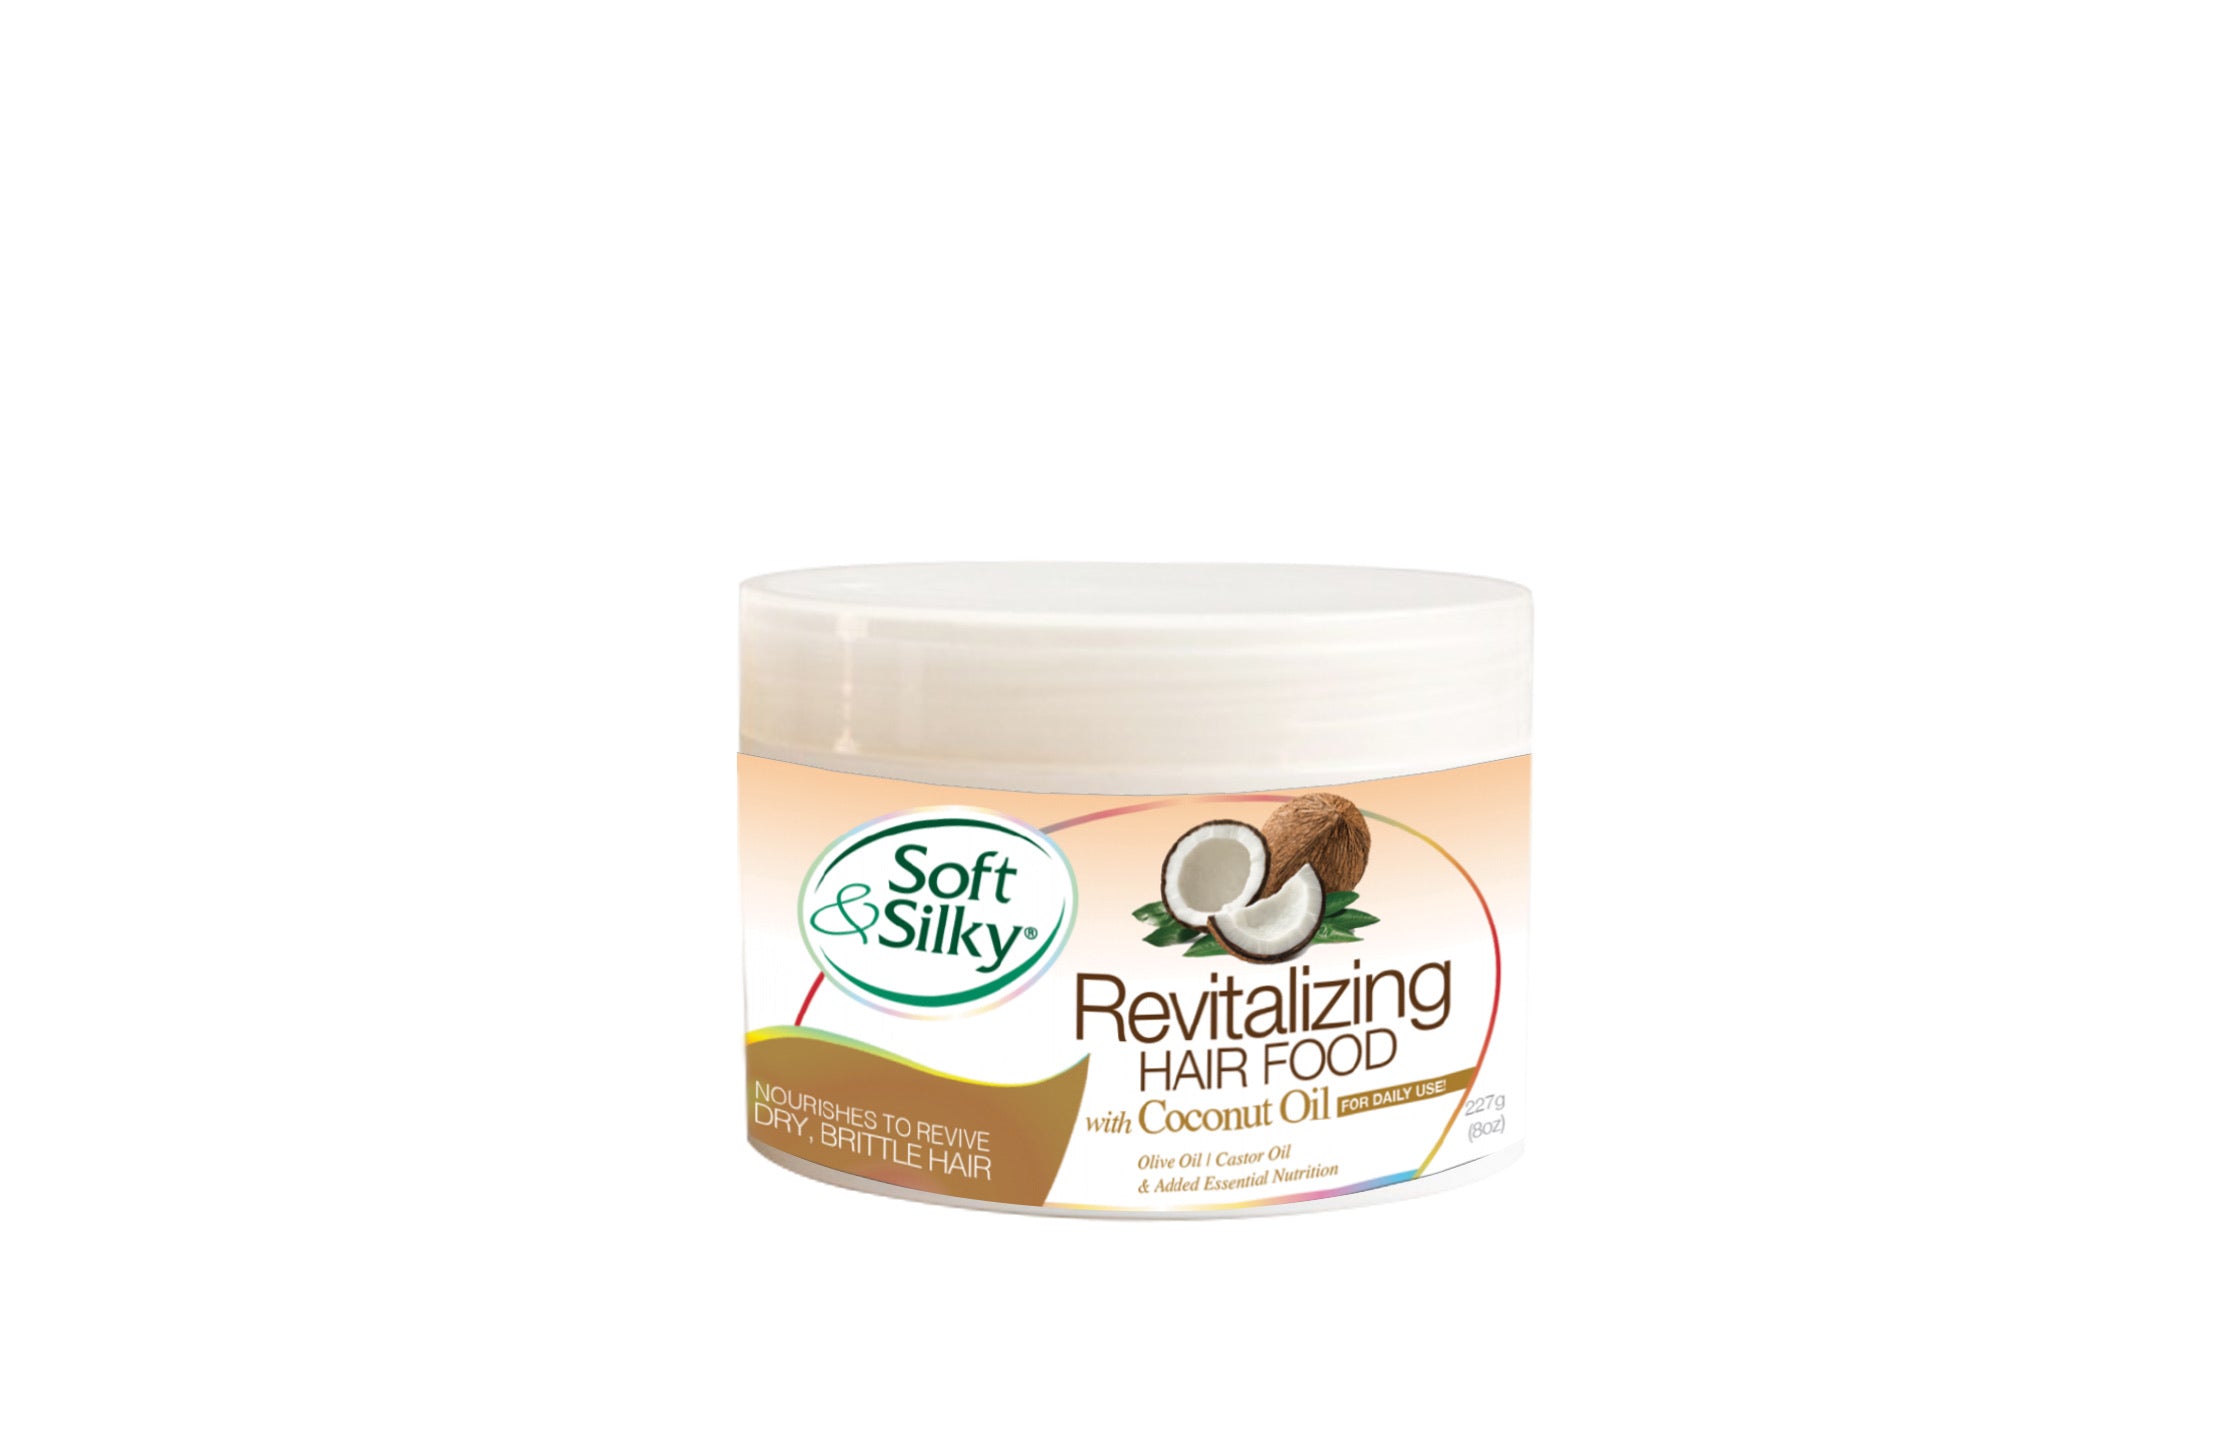 Soft & silky revitalizing hair food with coconut oil